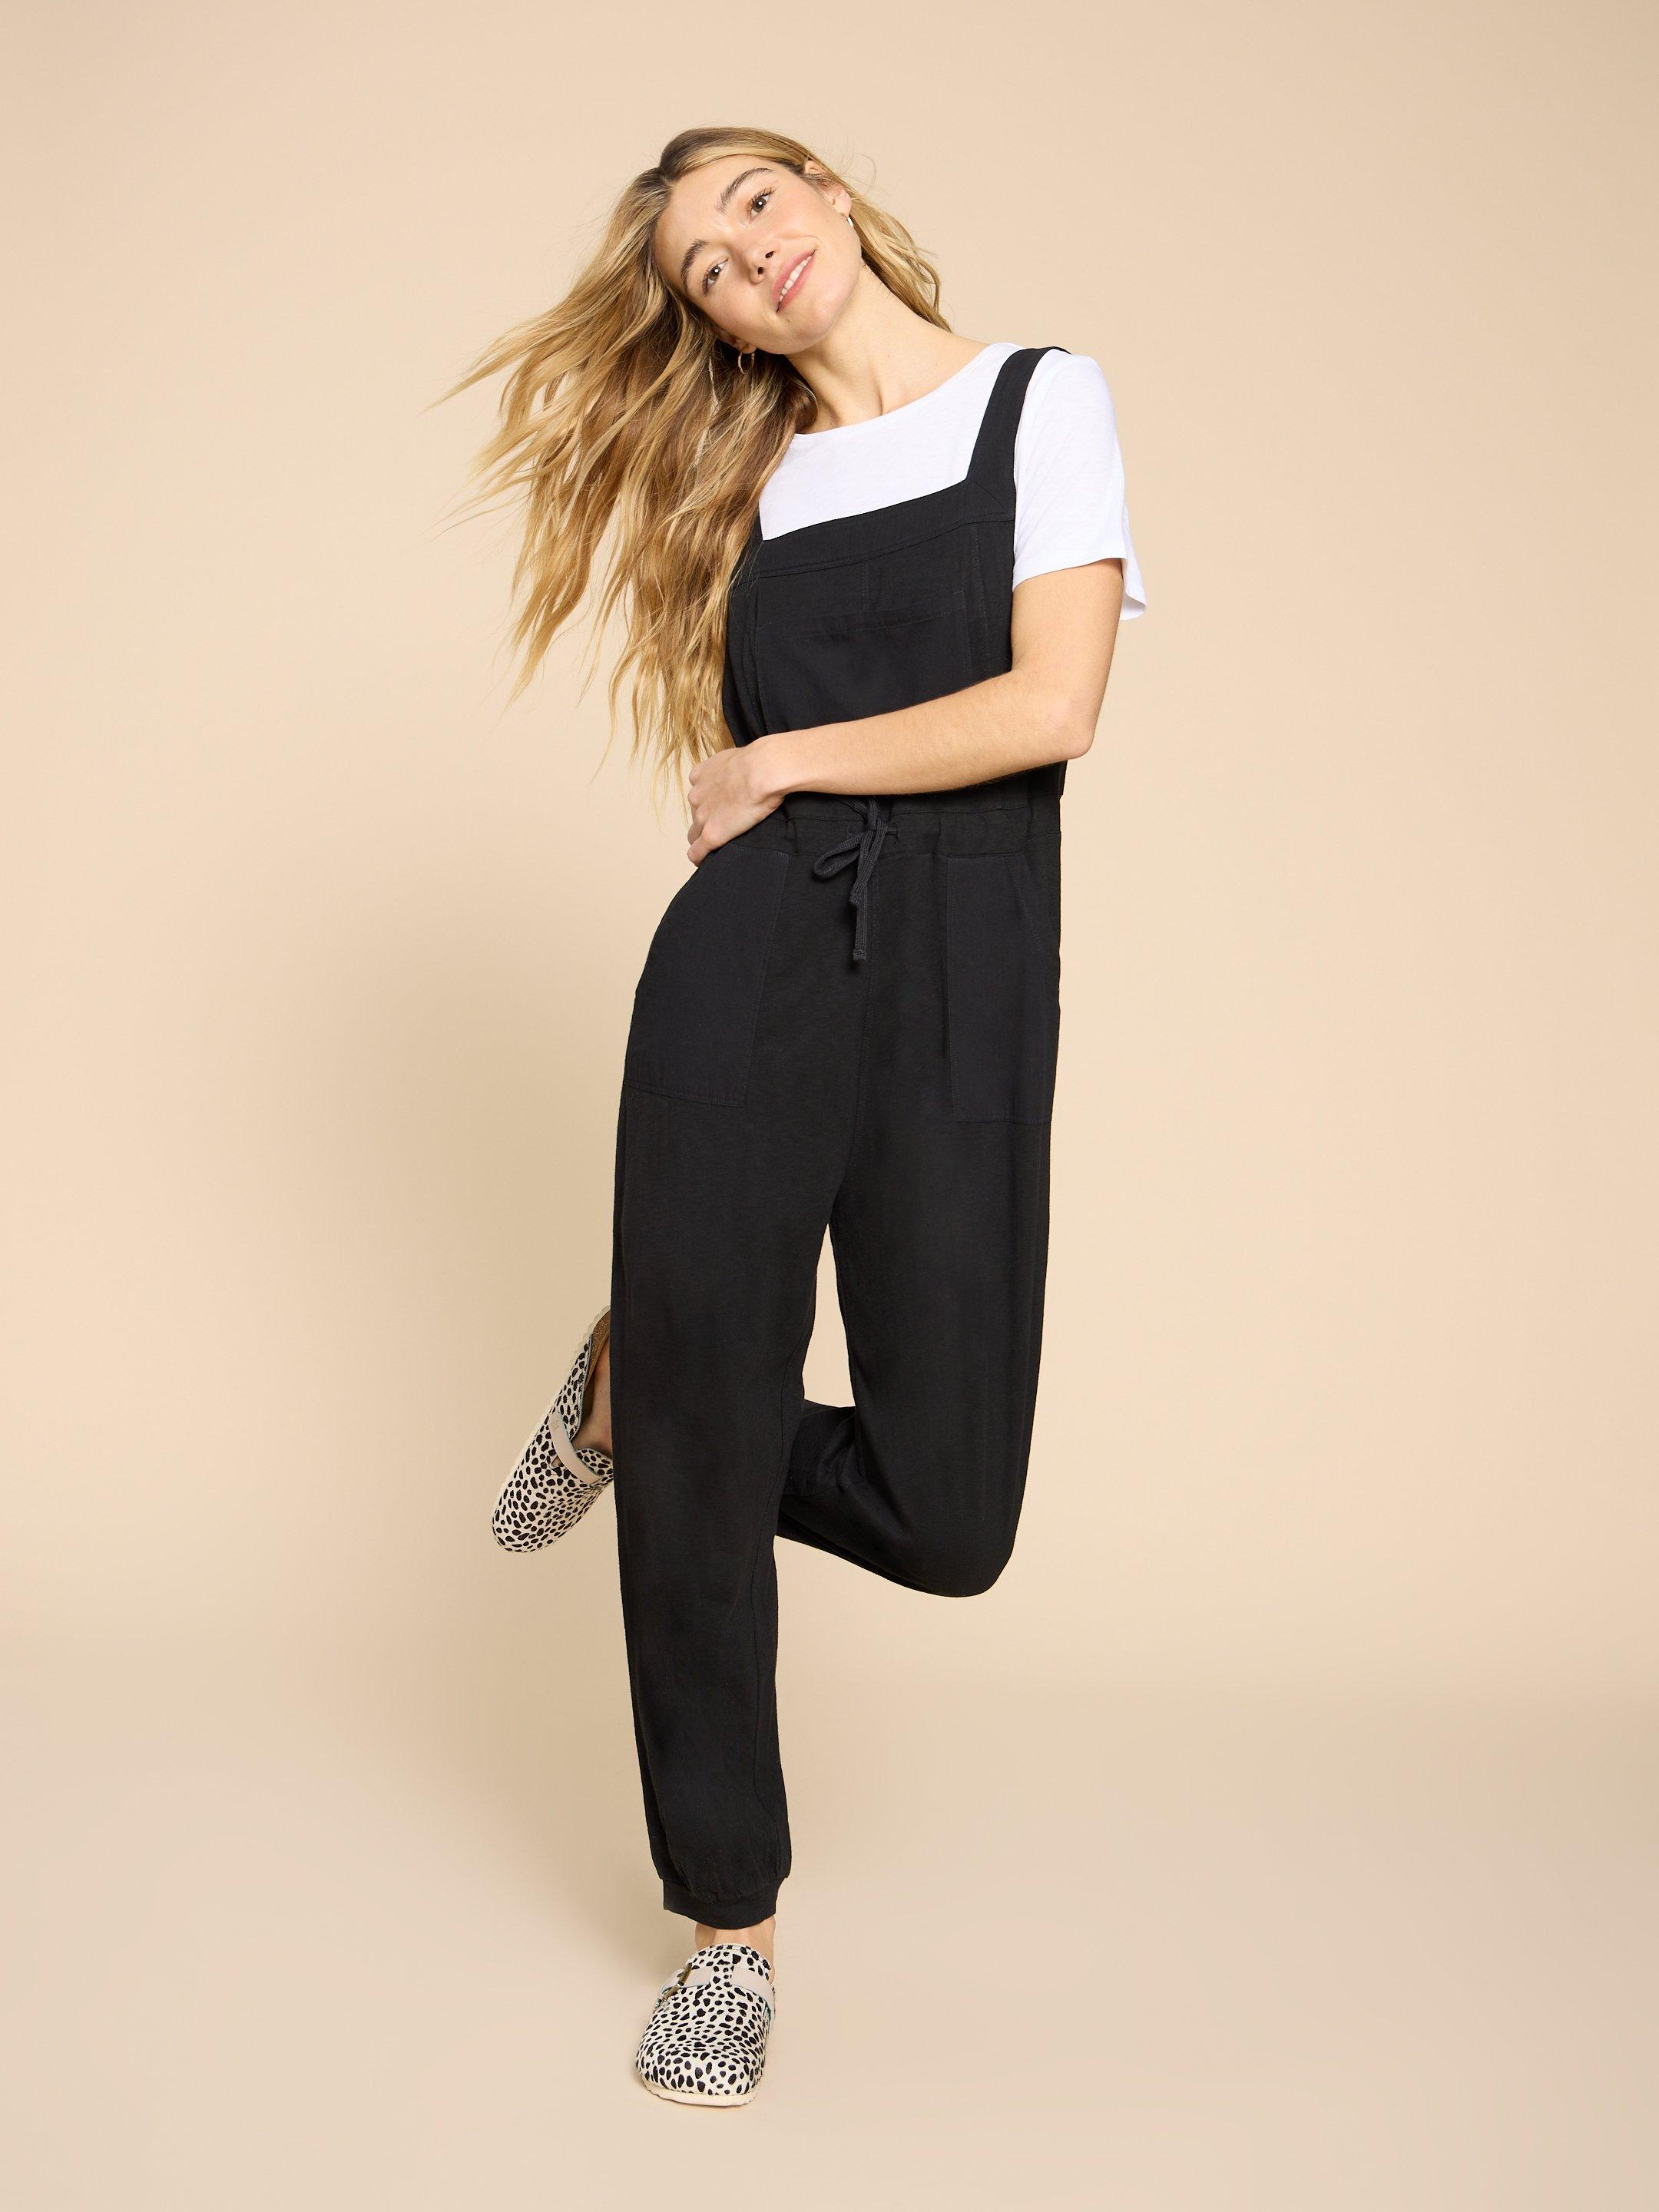 Daphne Jersey Dungaree in PURE BLK - LIFESTYLE